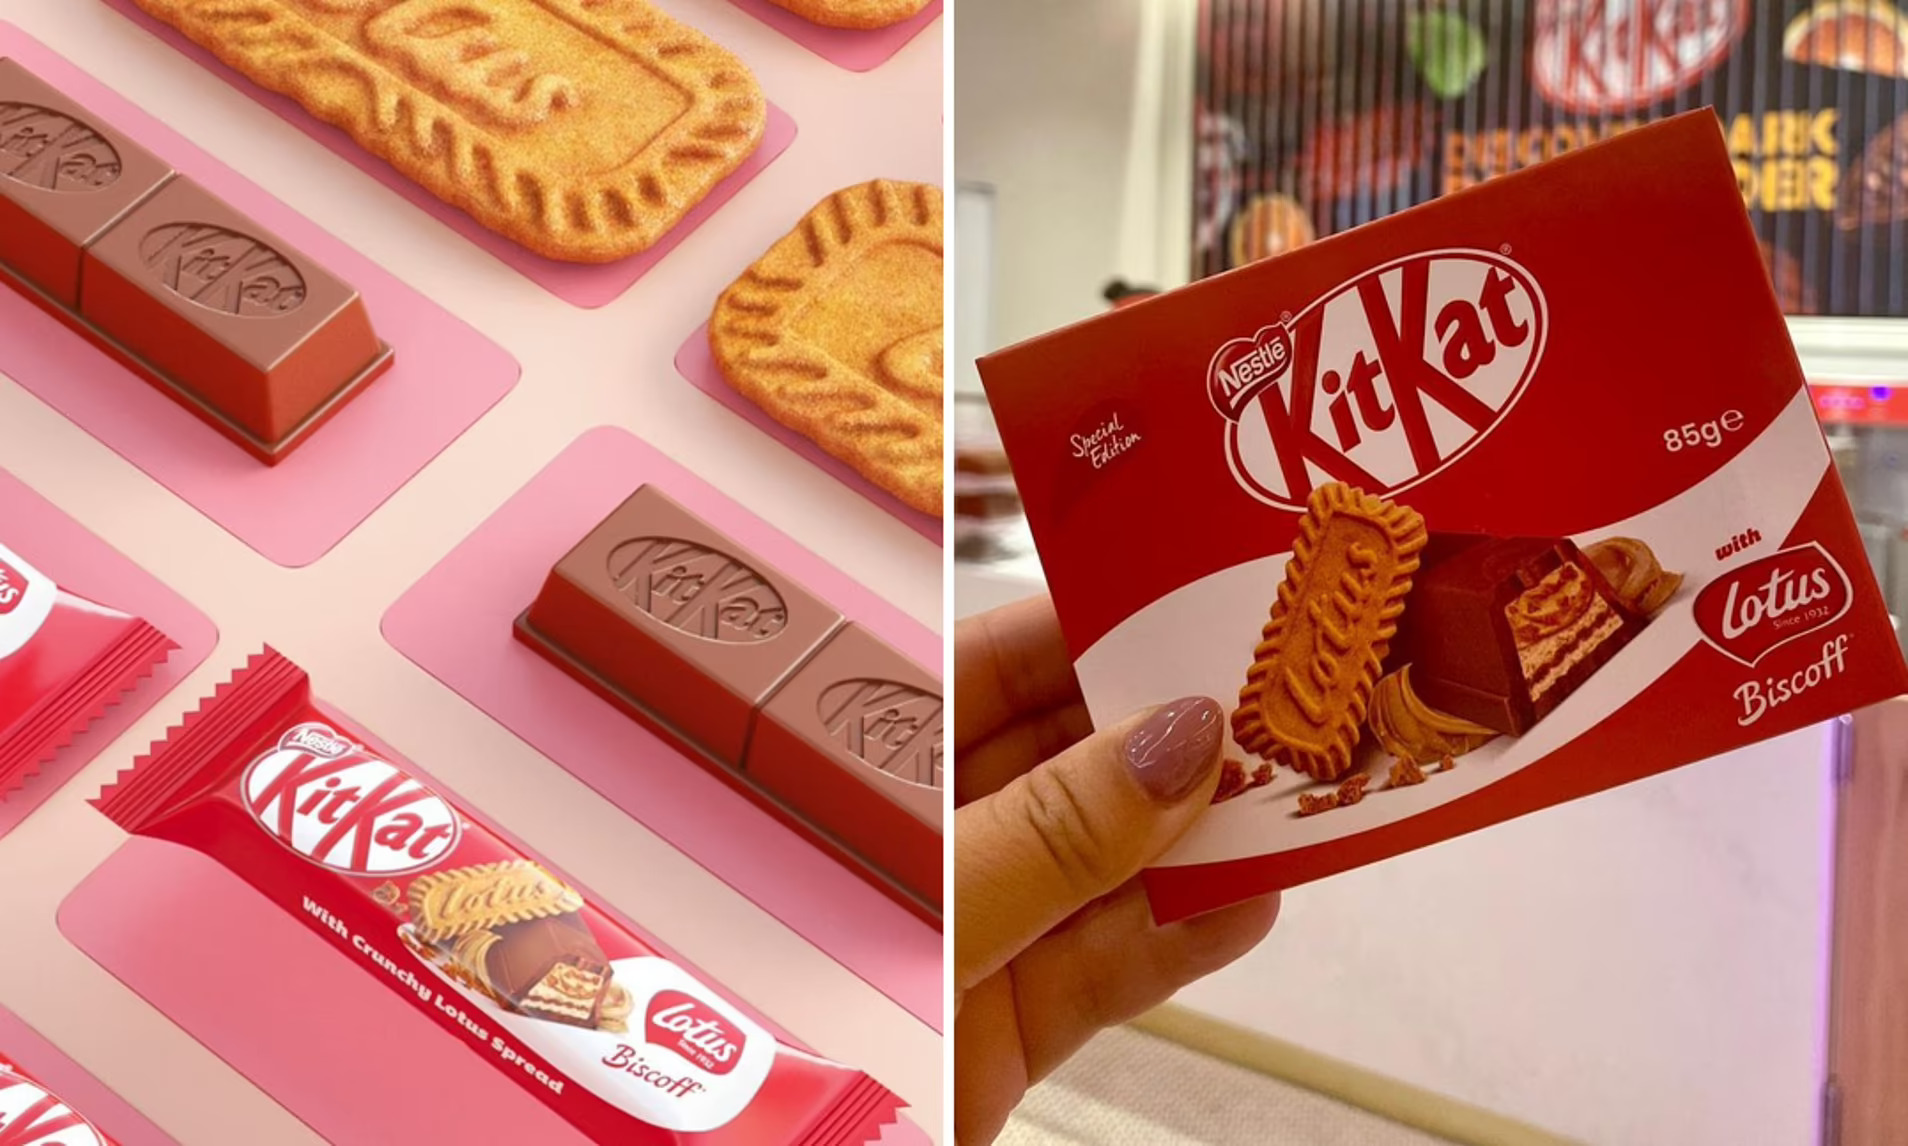 Biscoff Kitkats, Kitkats, Lotus biscuits on a pink surface; A hand holding a Biscoff Kitkat box